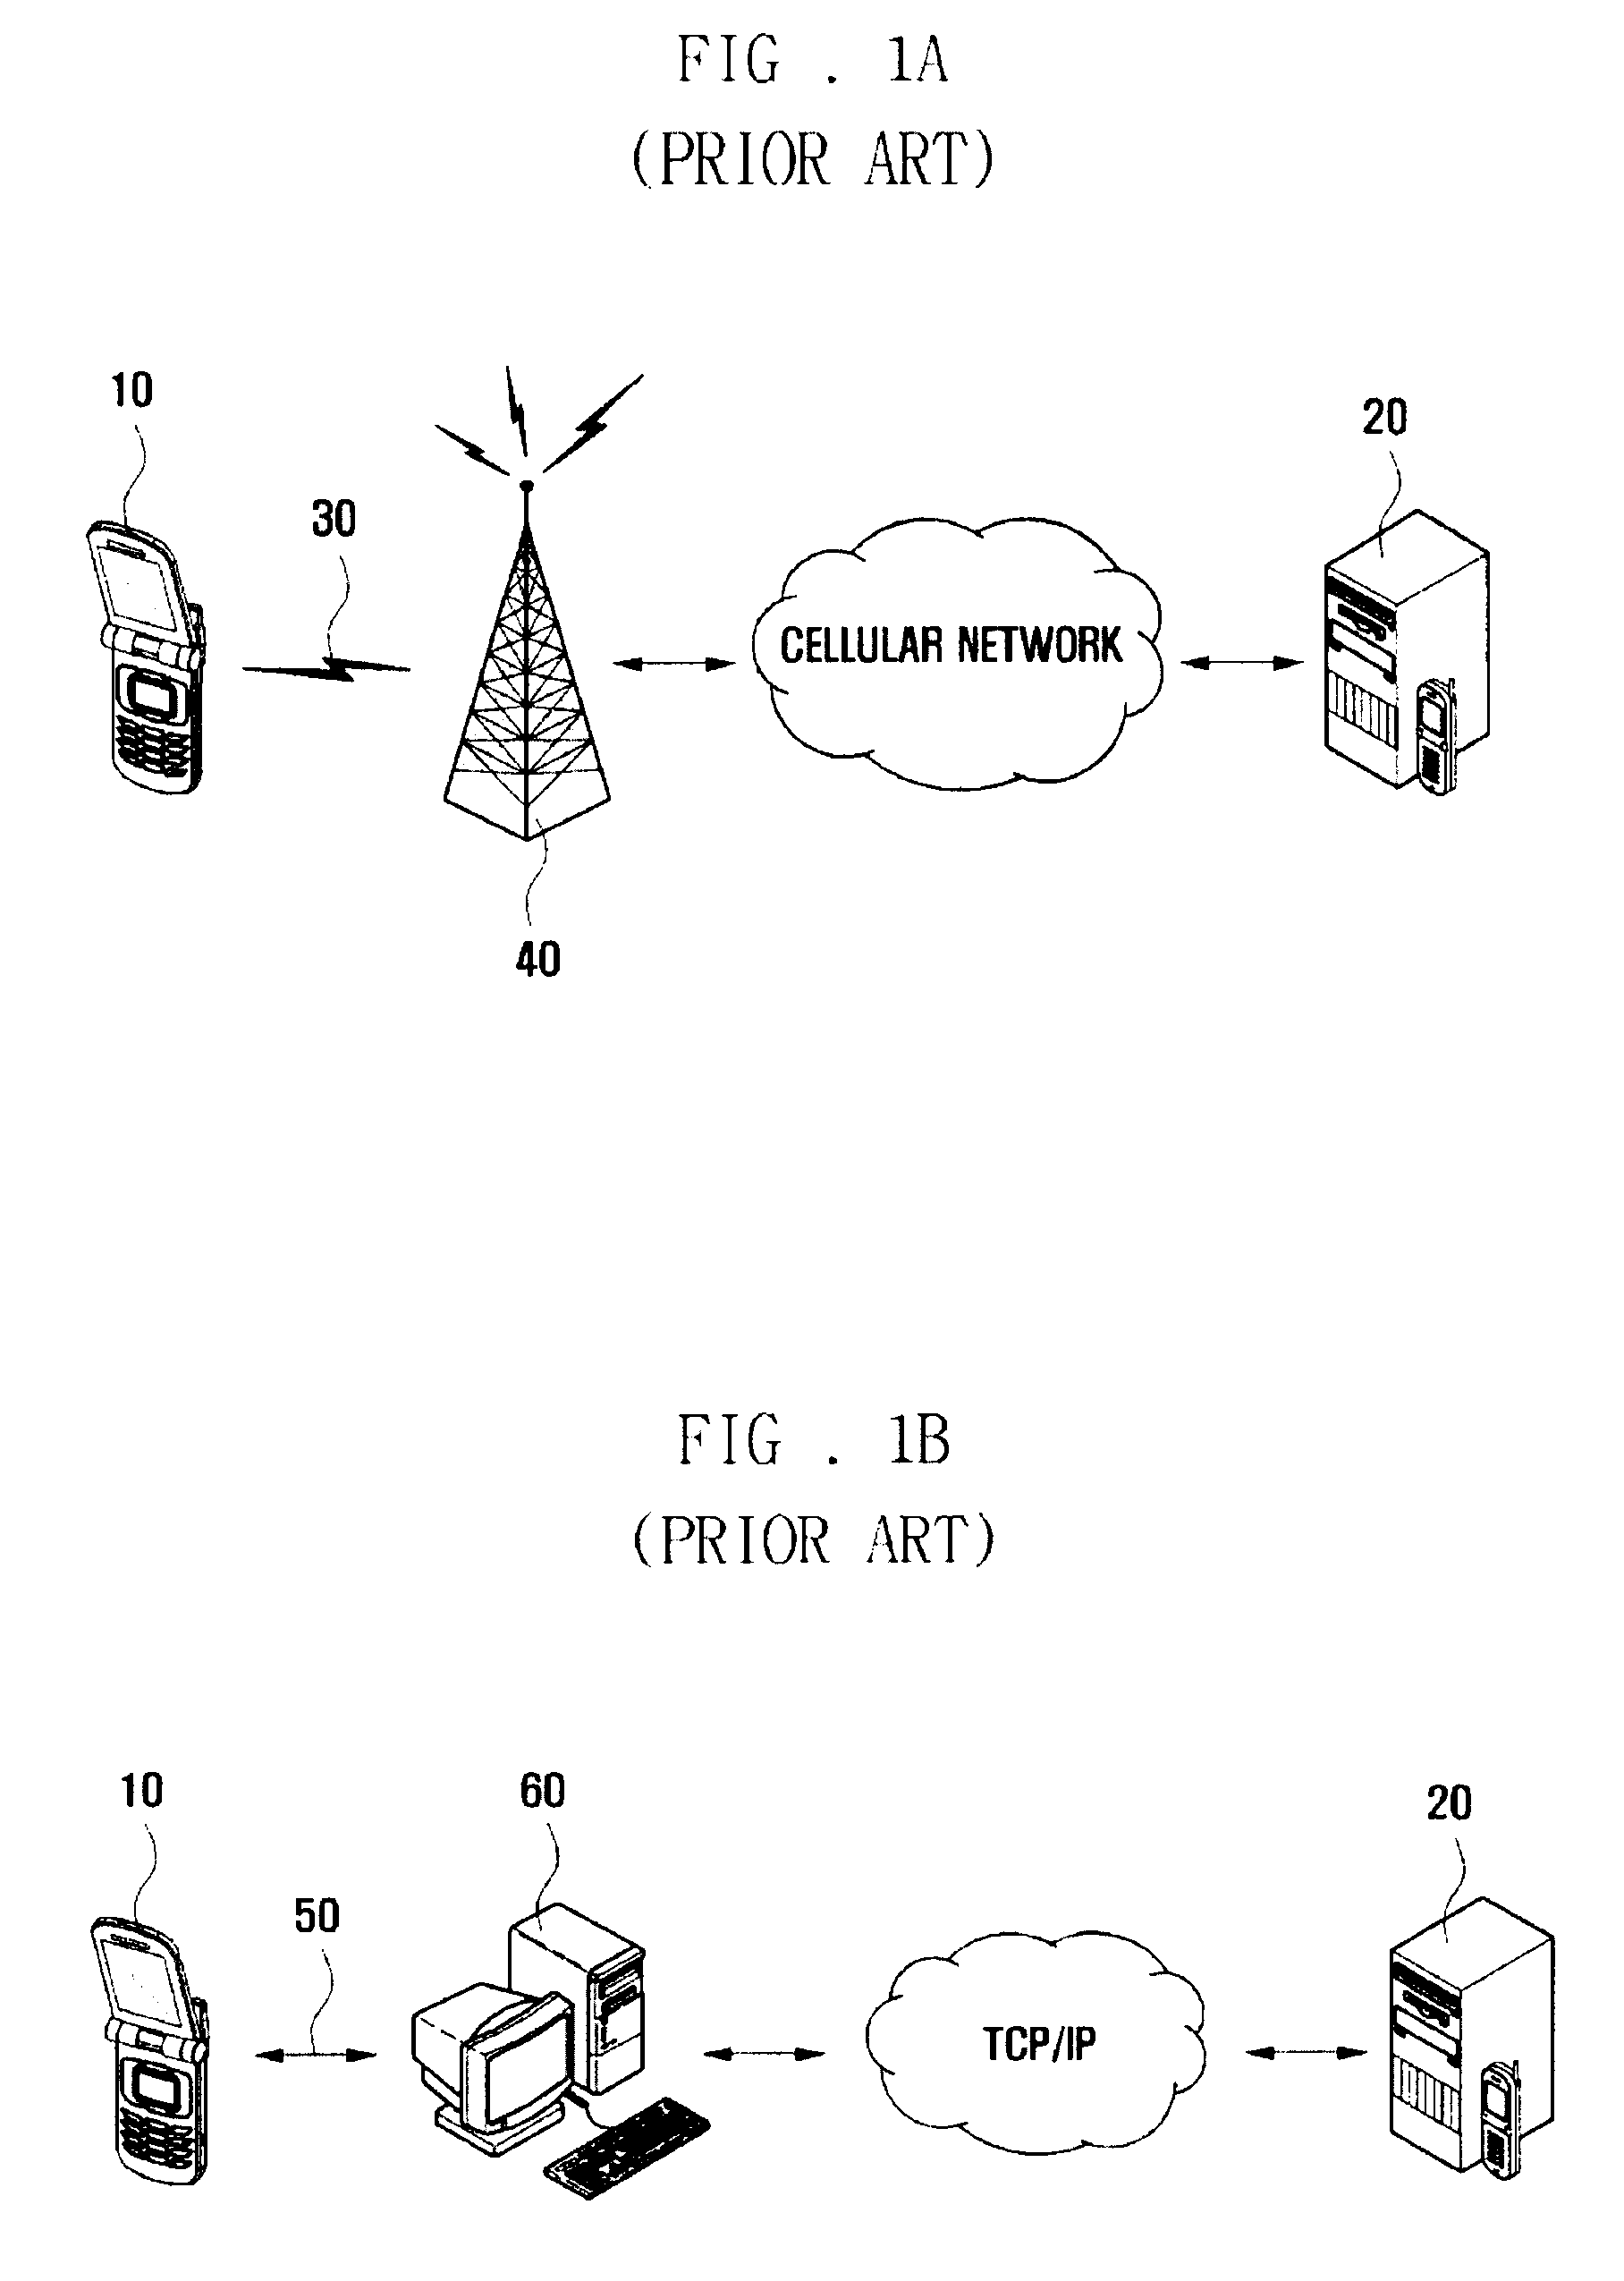 Method and system for synchronizing data between mobile terminal and internet phone